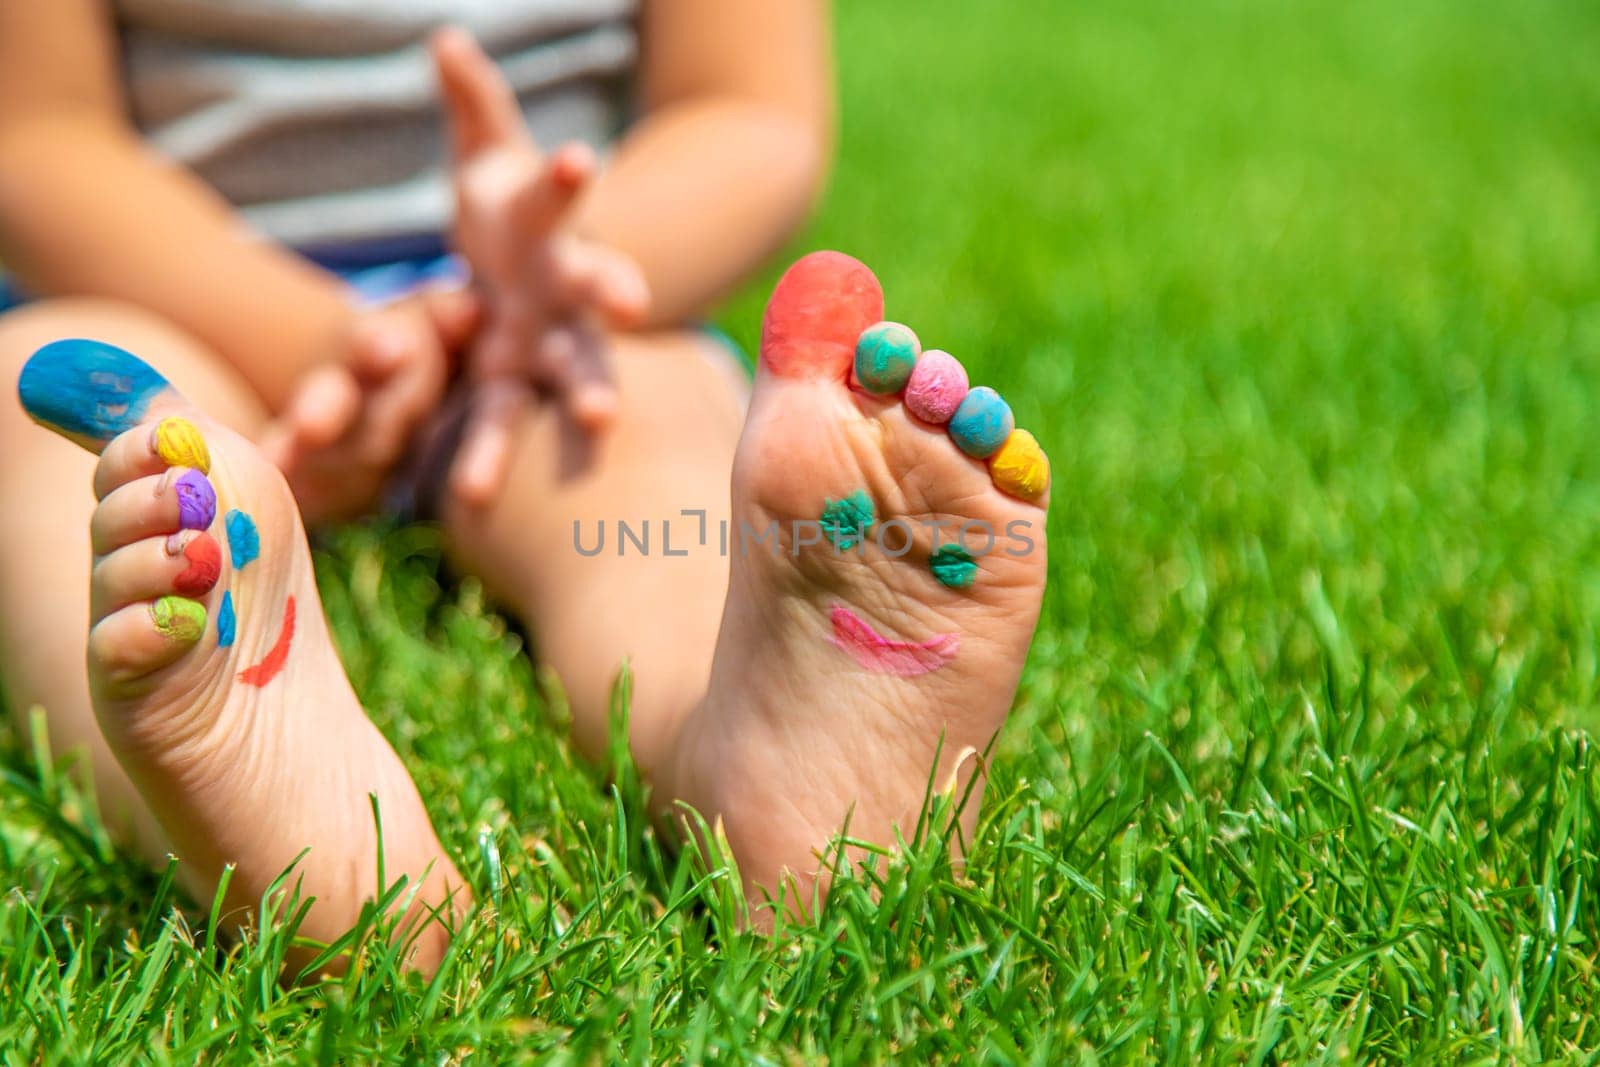 Child feet drawing smile in the park on the grass. Selective focus. Kid.